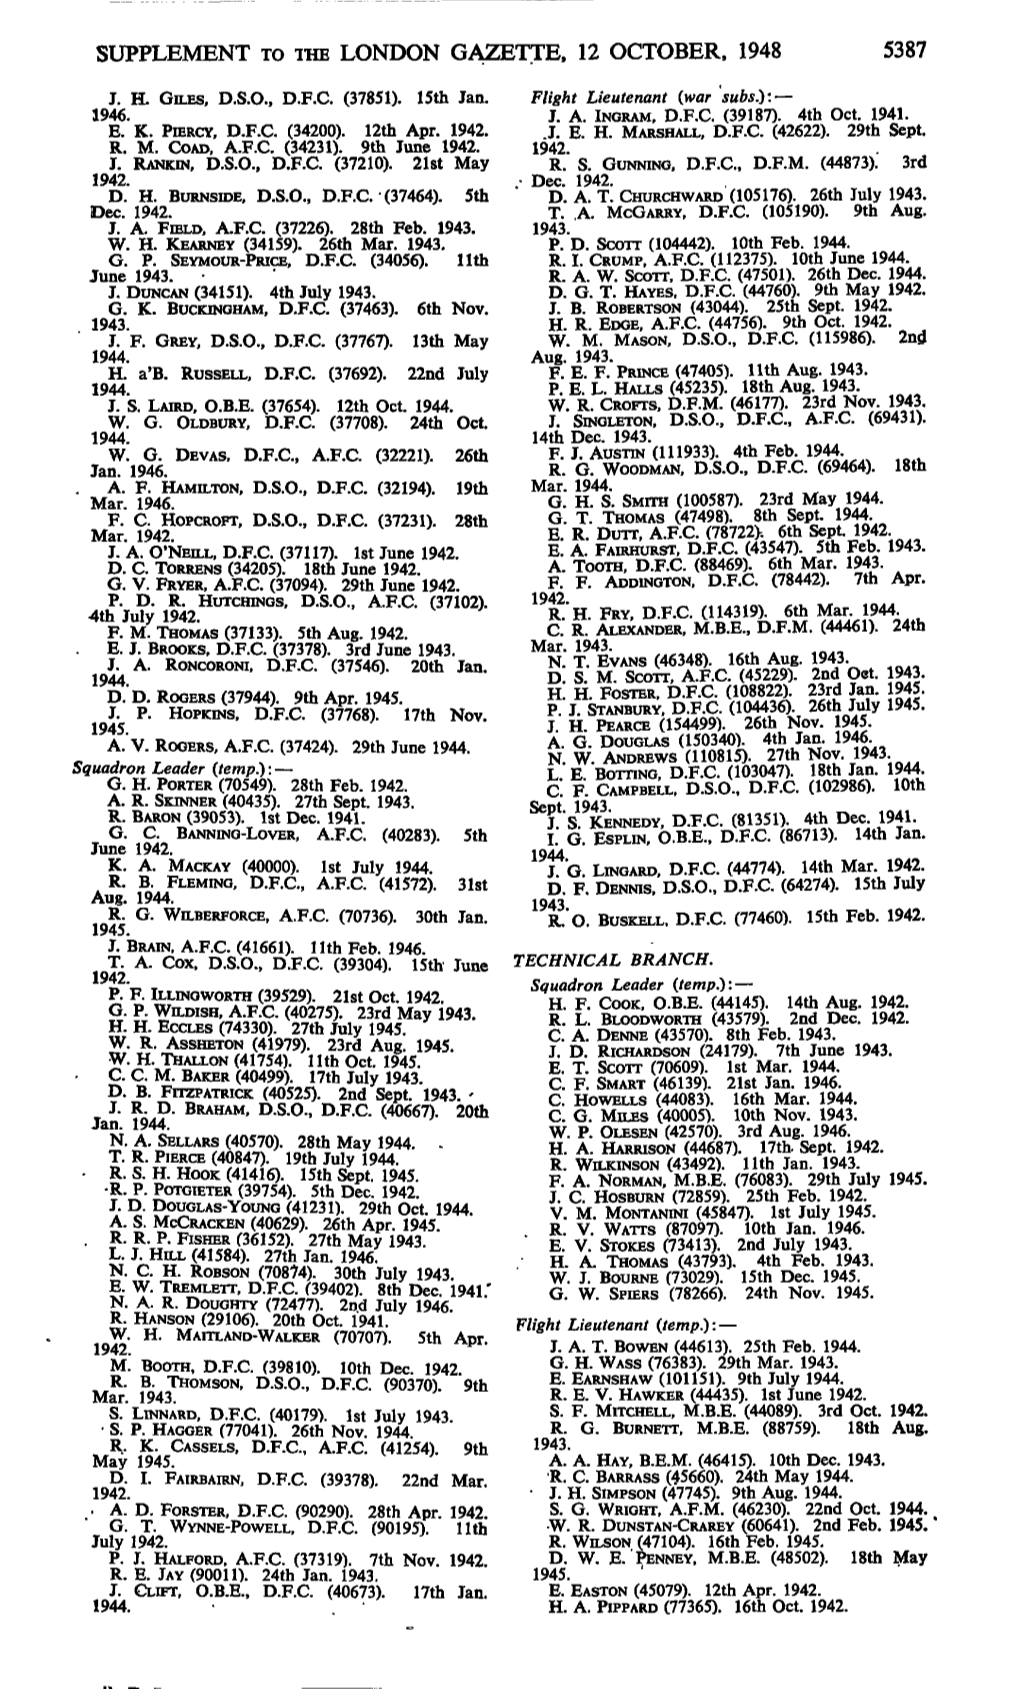 Supplement to the London Gazette, 12 October, 1948 5387